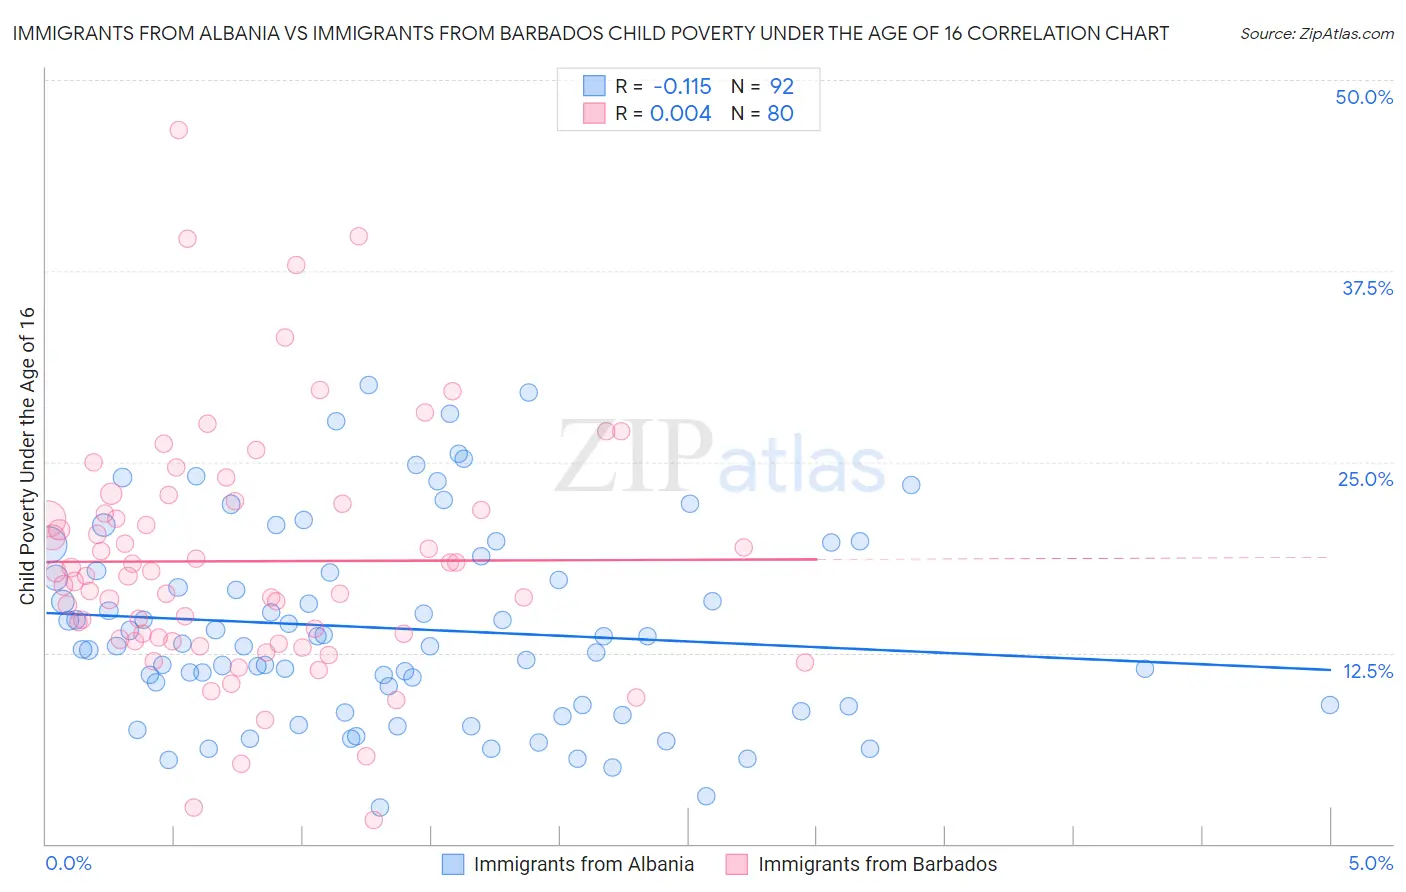 Immigrants from Albania vs Immigrants from Barbados Child Poverty Under the Age of 16